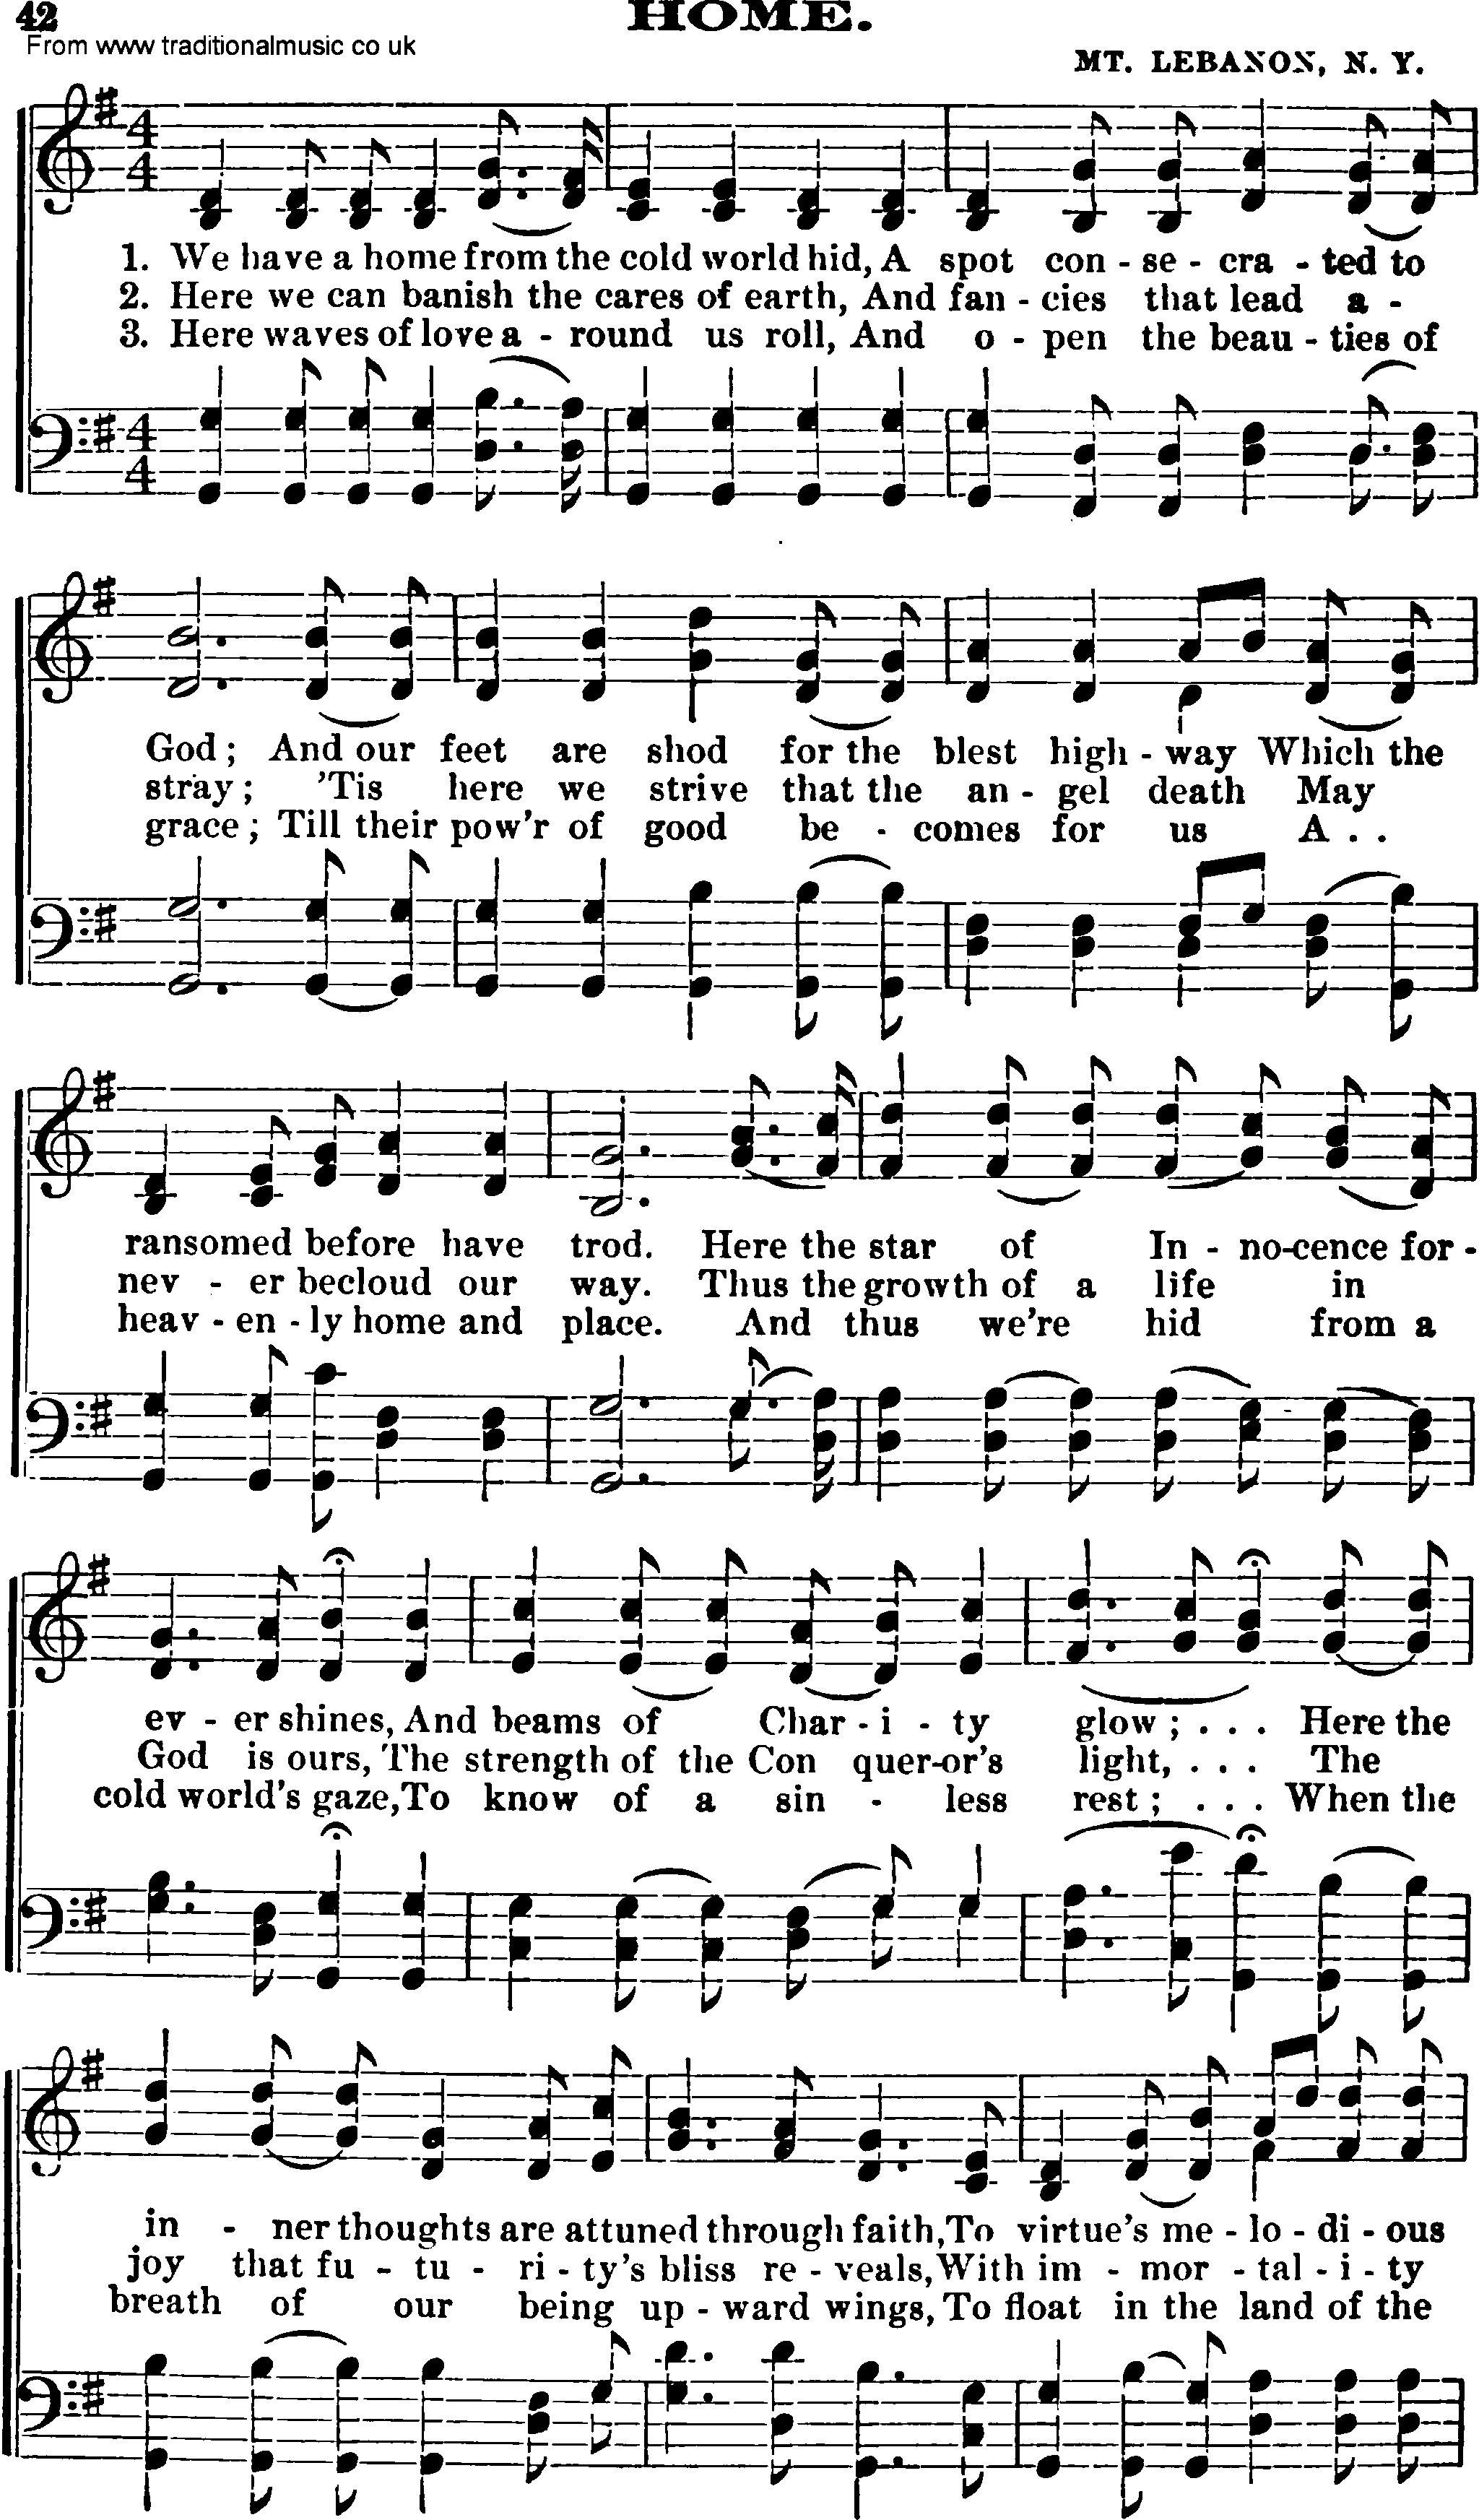 Shaker Music collection, Hymn: Home, sheetmusic and PDF